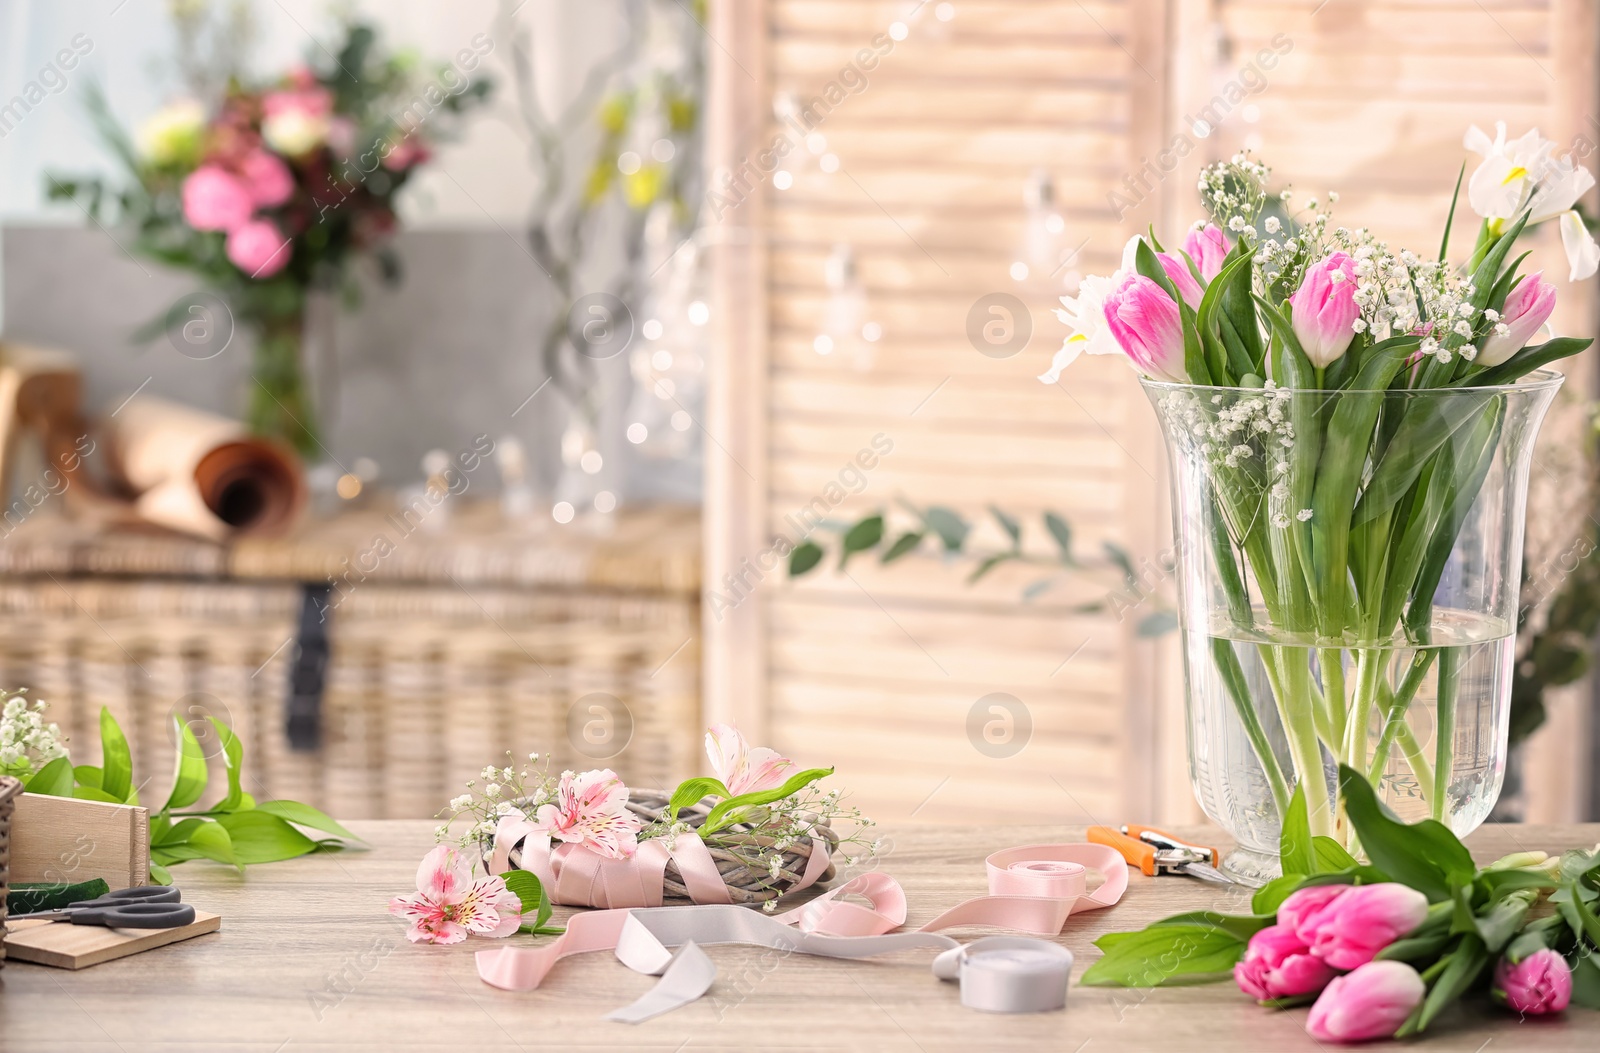 Photo of Decorator's workplace with beautiful flowers and unfinished wreath on table